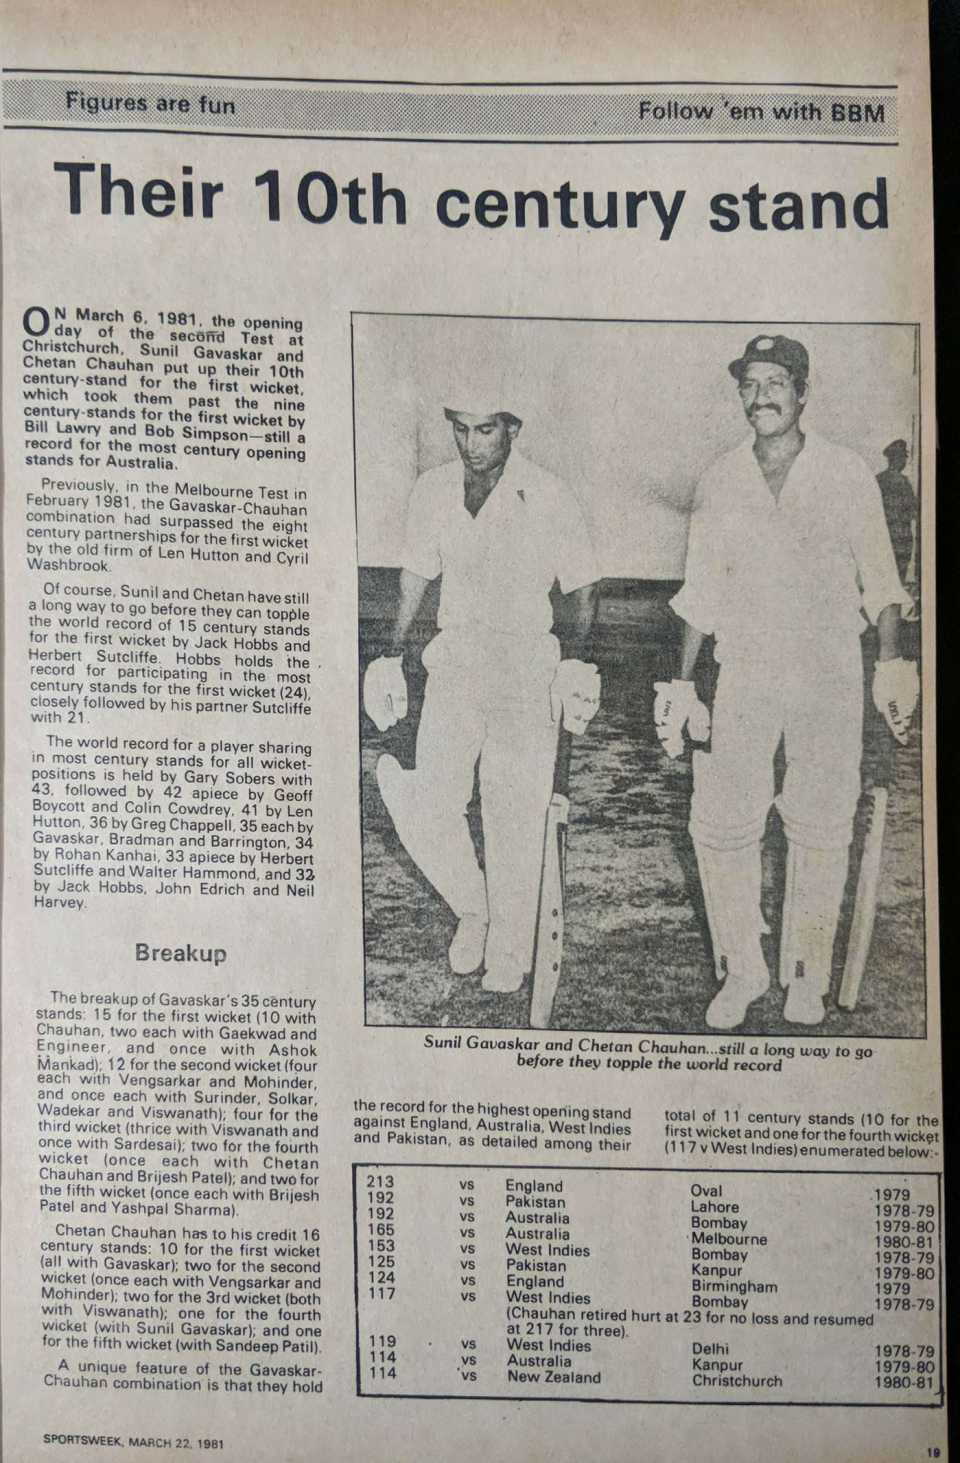 A <i>Sportsweek</i> magazine page about the tenth century stand for the first wicket between Sunil Gavaskar and Chetan Chauhan, achieved against New Zealand in Christchurch during the 1980-81 series